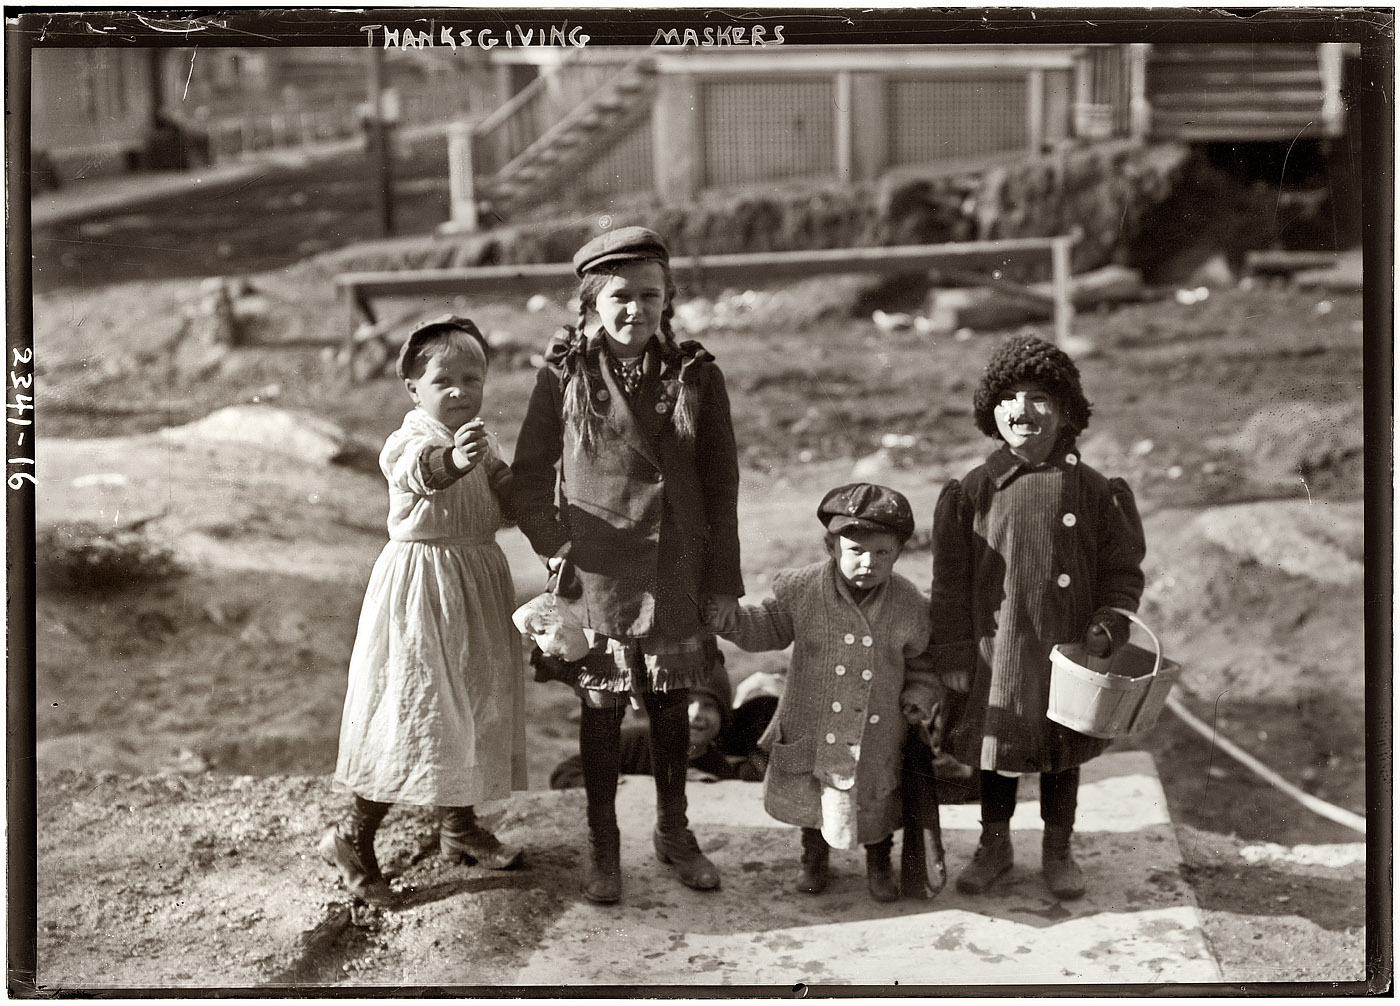 November 1911. Before Halloween came into its own as a holiday in this country, there was "Thanksgiving masking," where kids would dress up and go door to door for apples, or maybe "scramble for pennies." View full size. 5x7 glass negative, George Grantham Bain Collection. Links: Yahoo Xtra | Encyclopedia.com